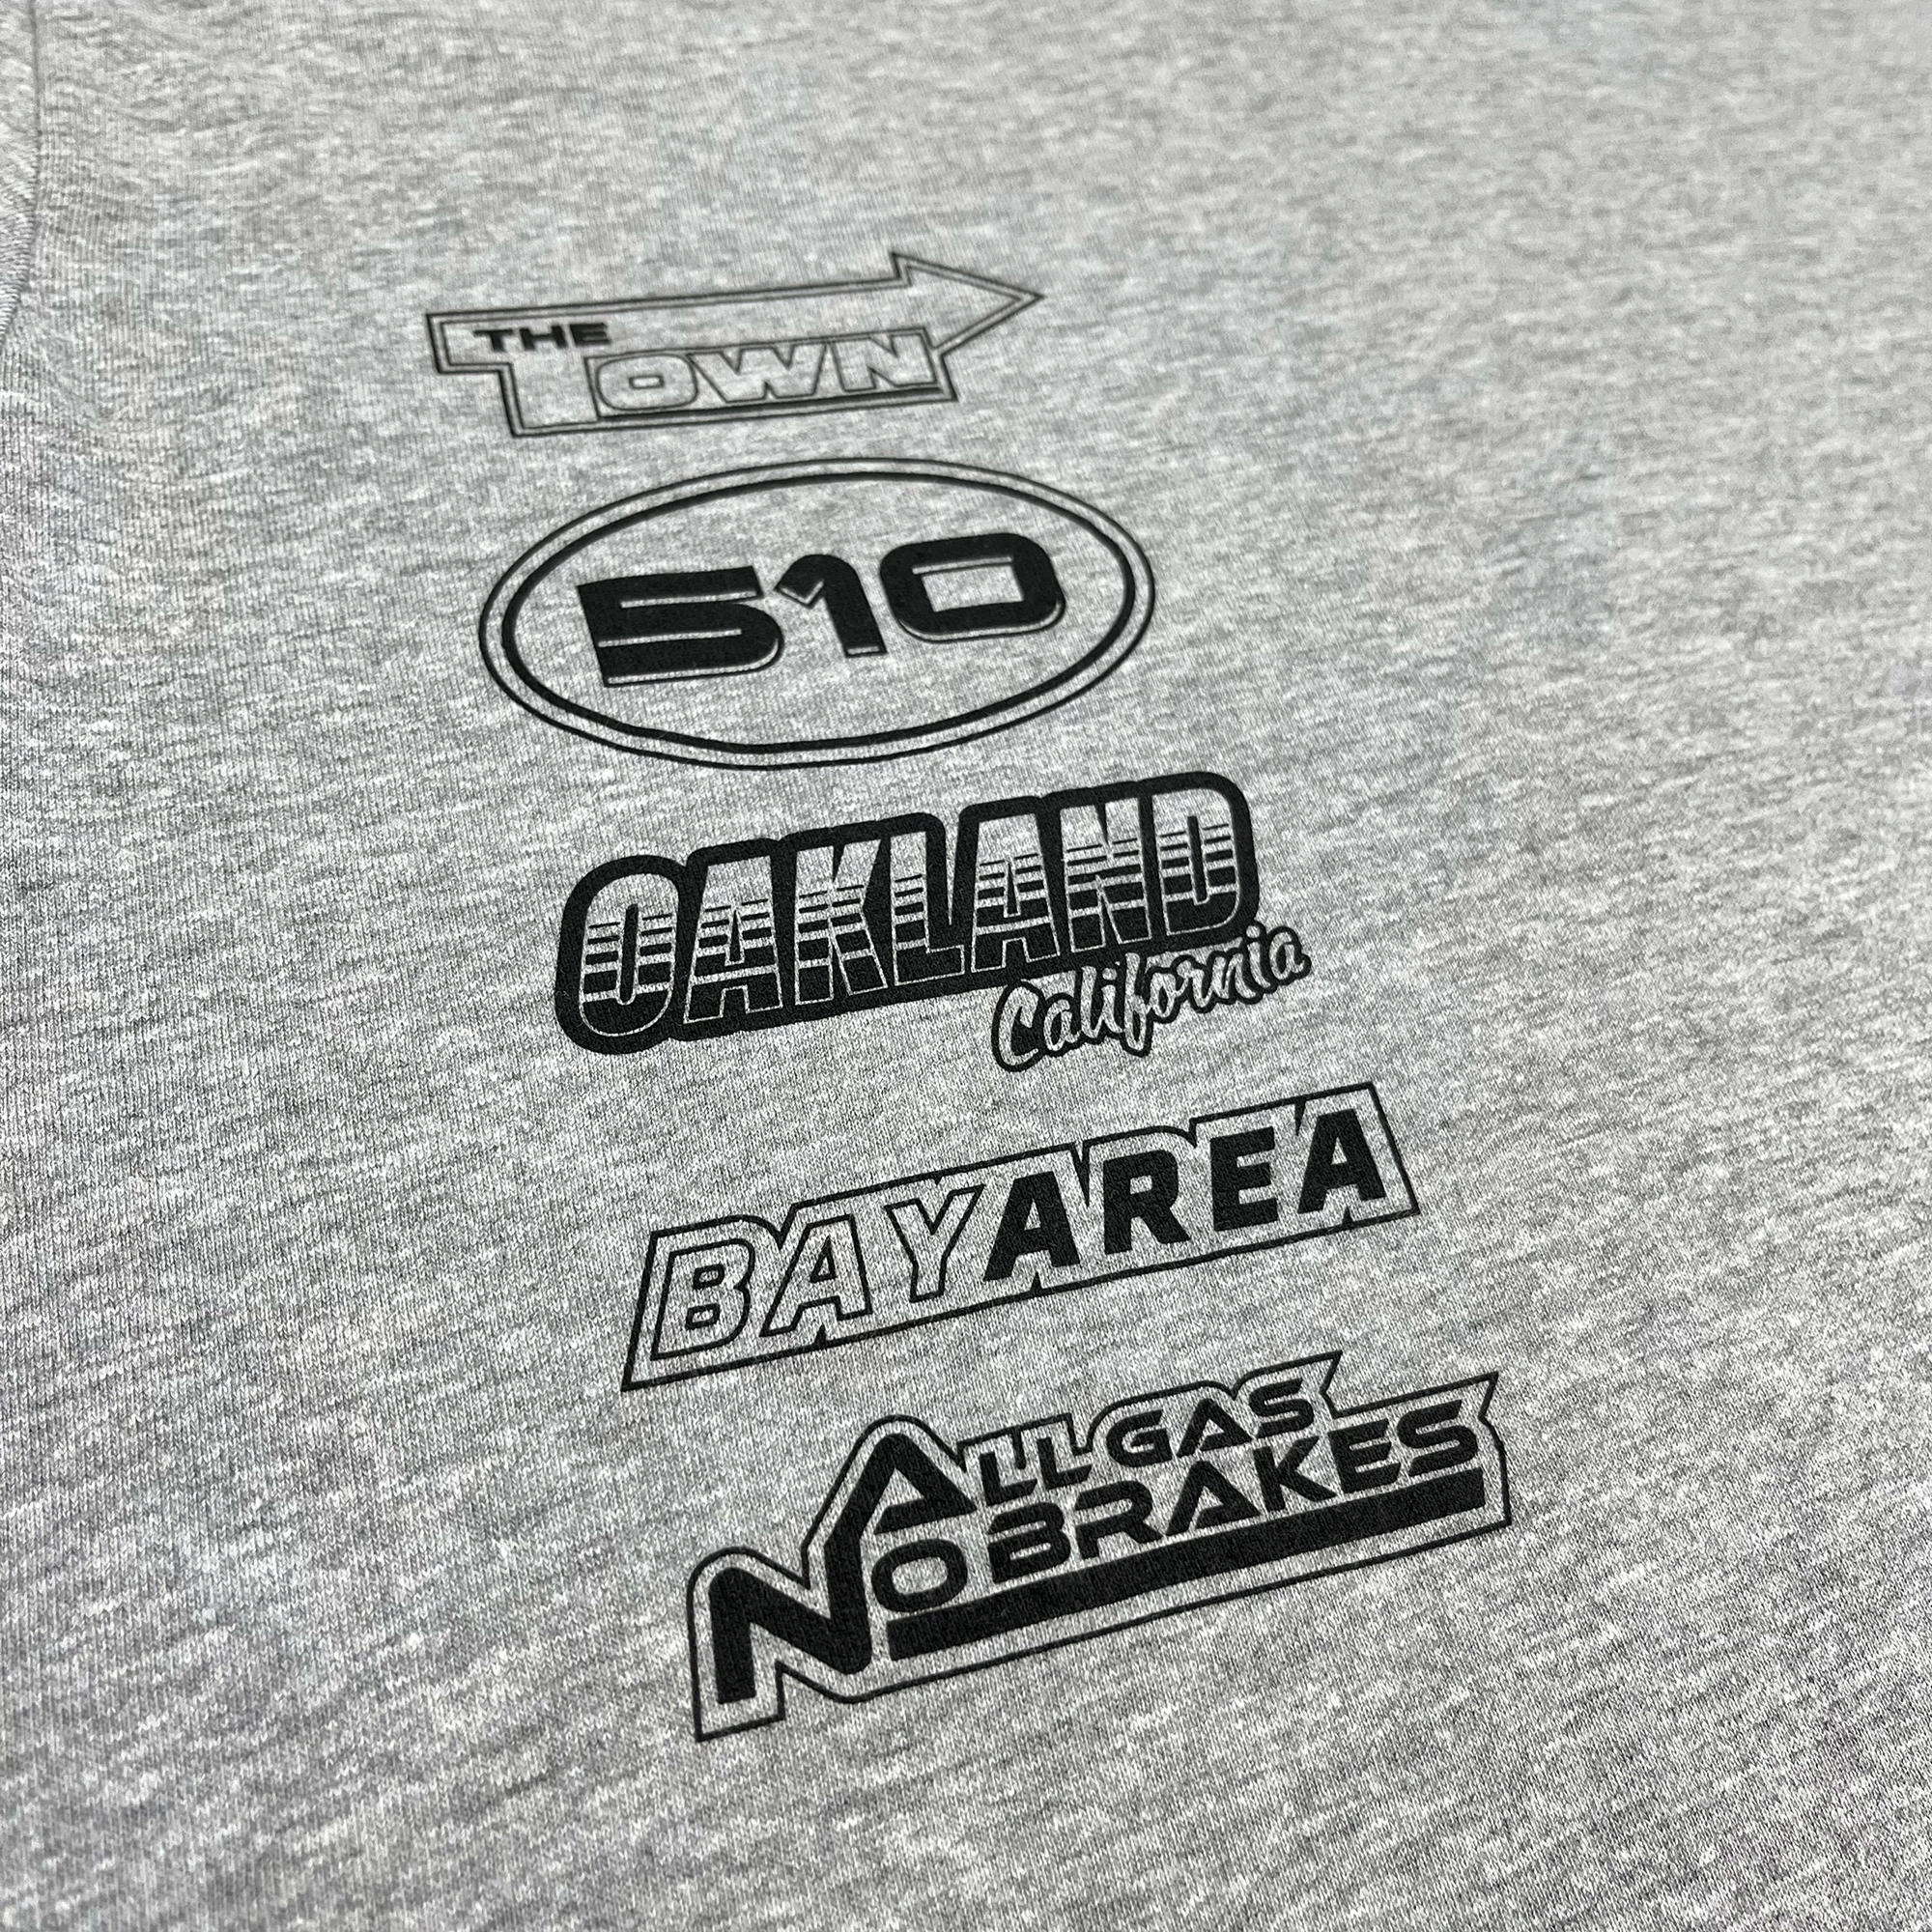 Close-up of black race car-inspired design and Oaklandish tree logo on a grey long-sleeved t-shirt.